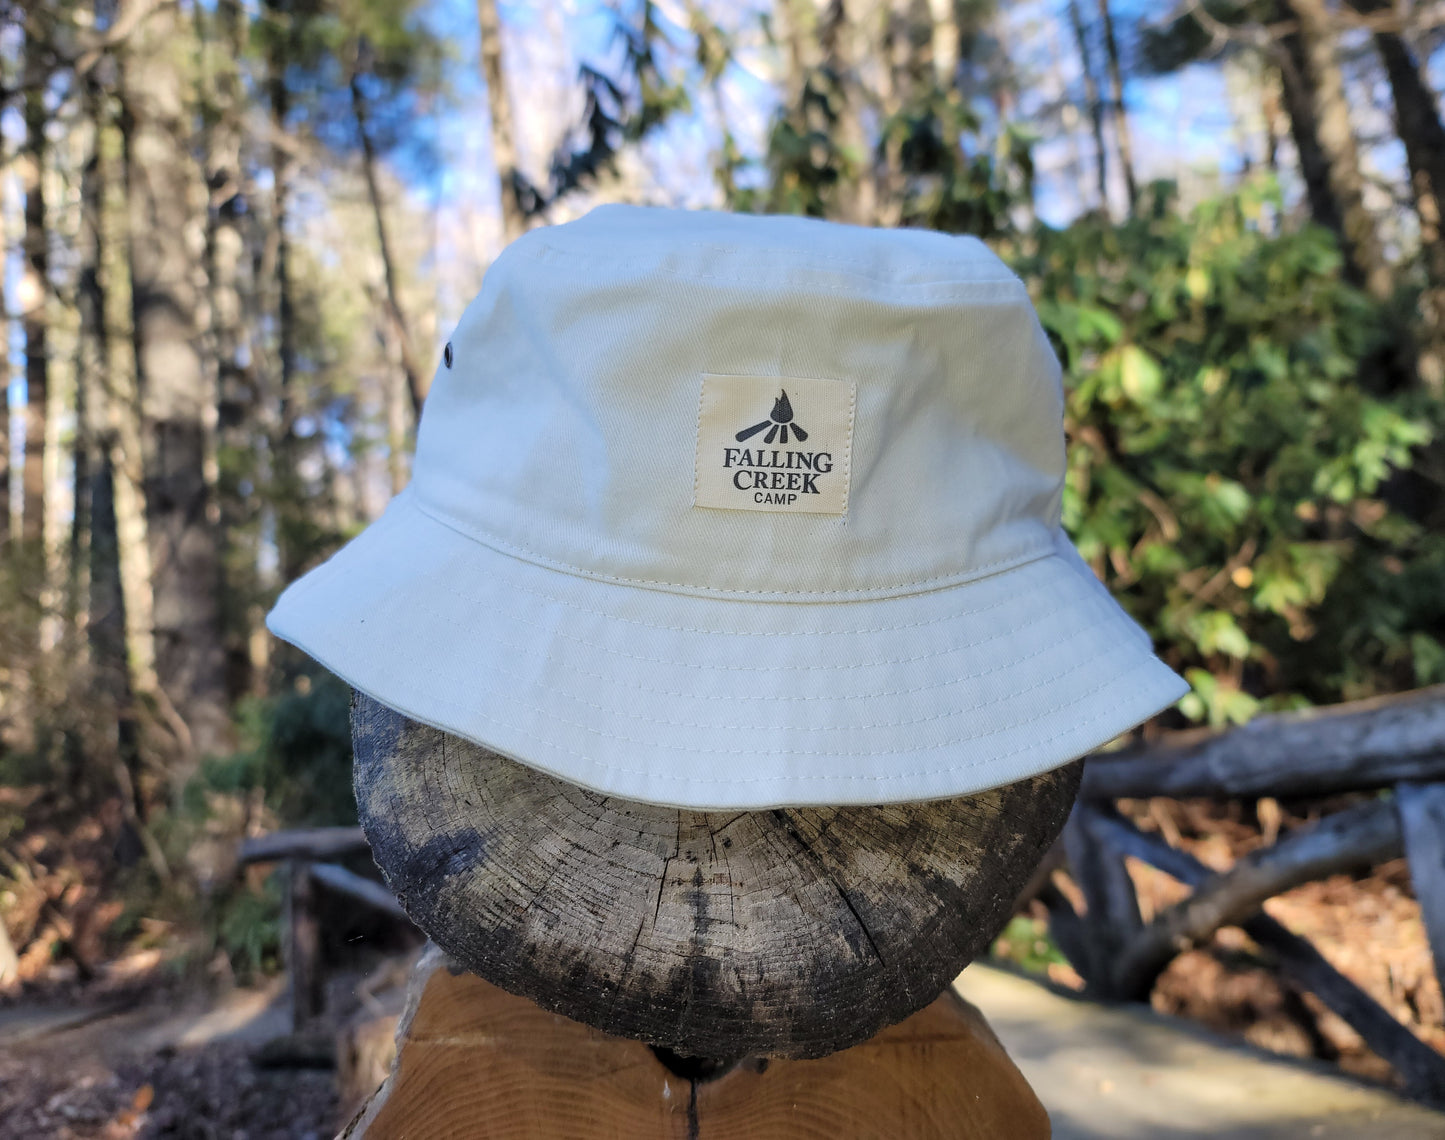 A tan putty colored bucket hat with a tan logo on the front that reads "Falling Creek Camp" sits on the end post of a wooden bridge outdoors.